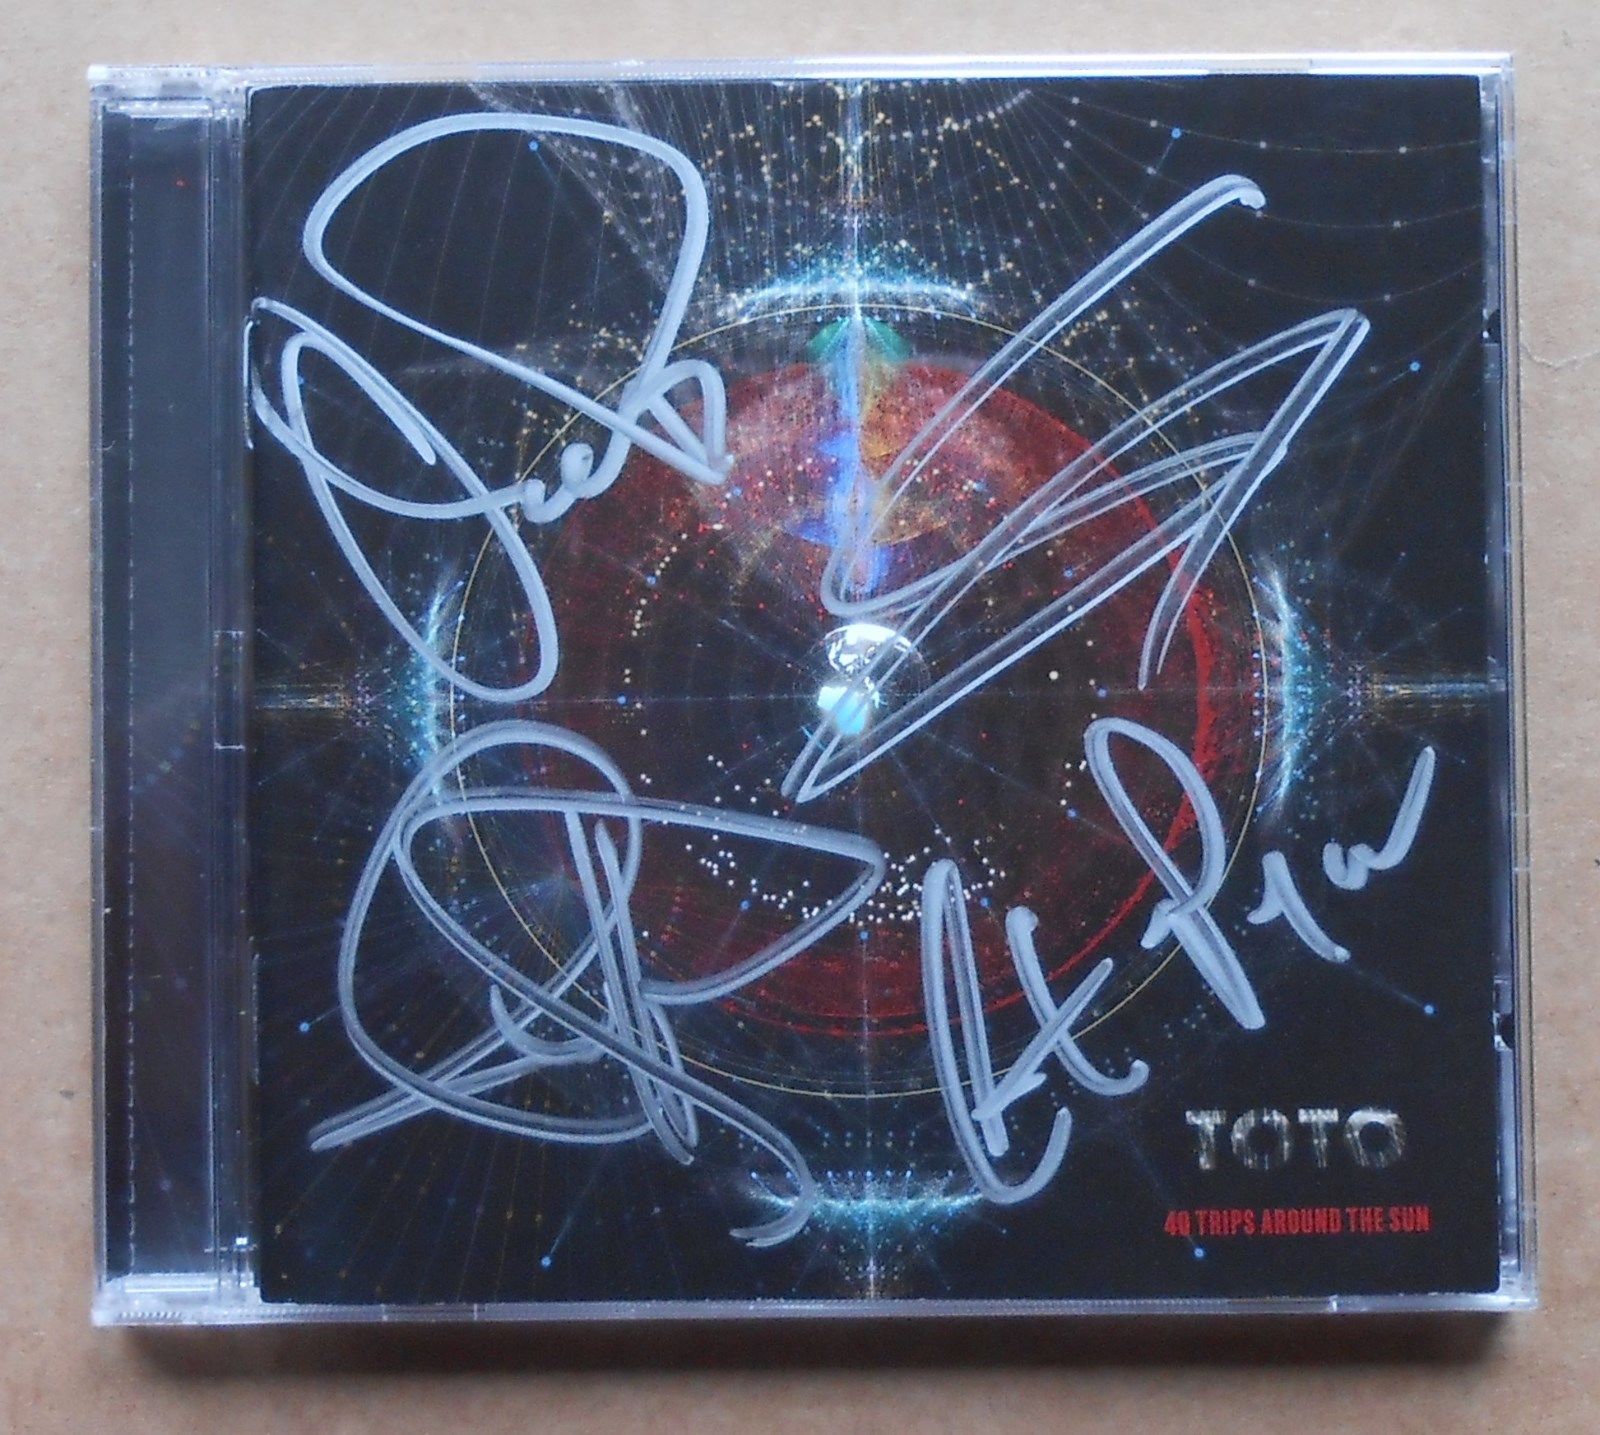 popsike.com - TOTO BAND AUTOGRAPHED NEW 2018 CD 40 TRIPS AROUND THE SUN  STEVE LUKATHER PAICH++ - auction details